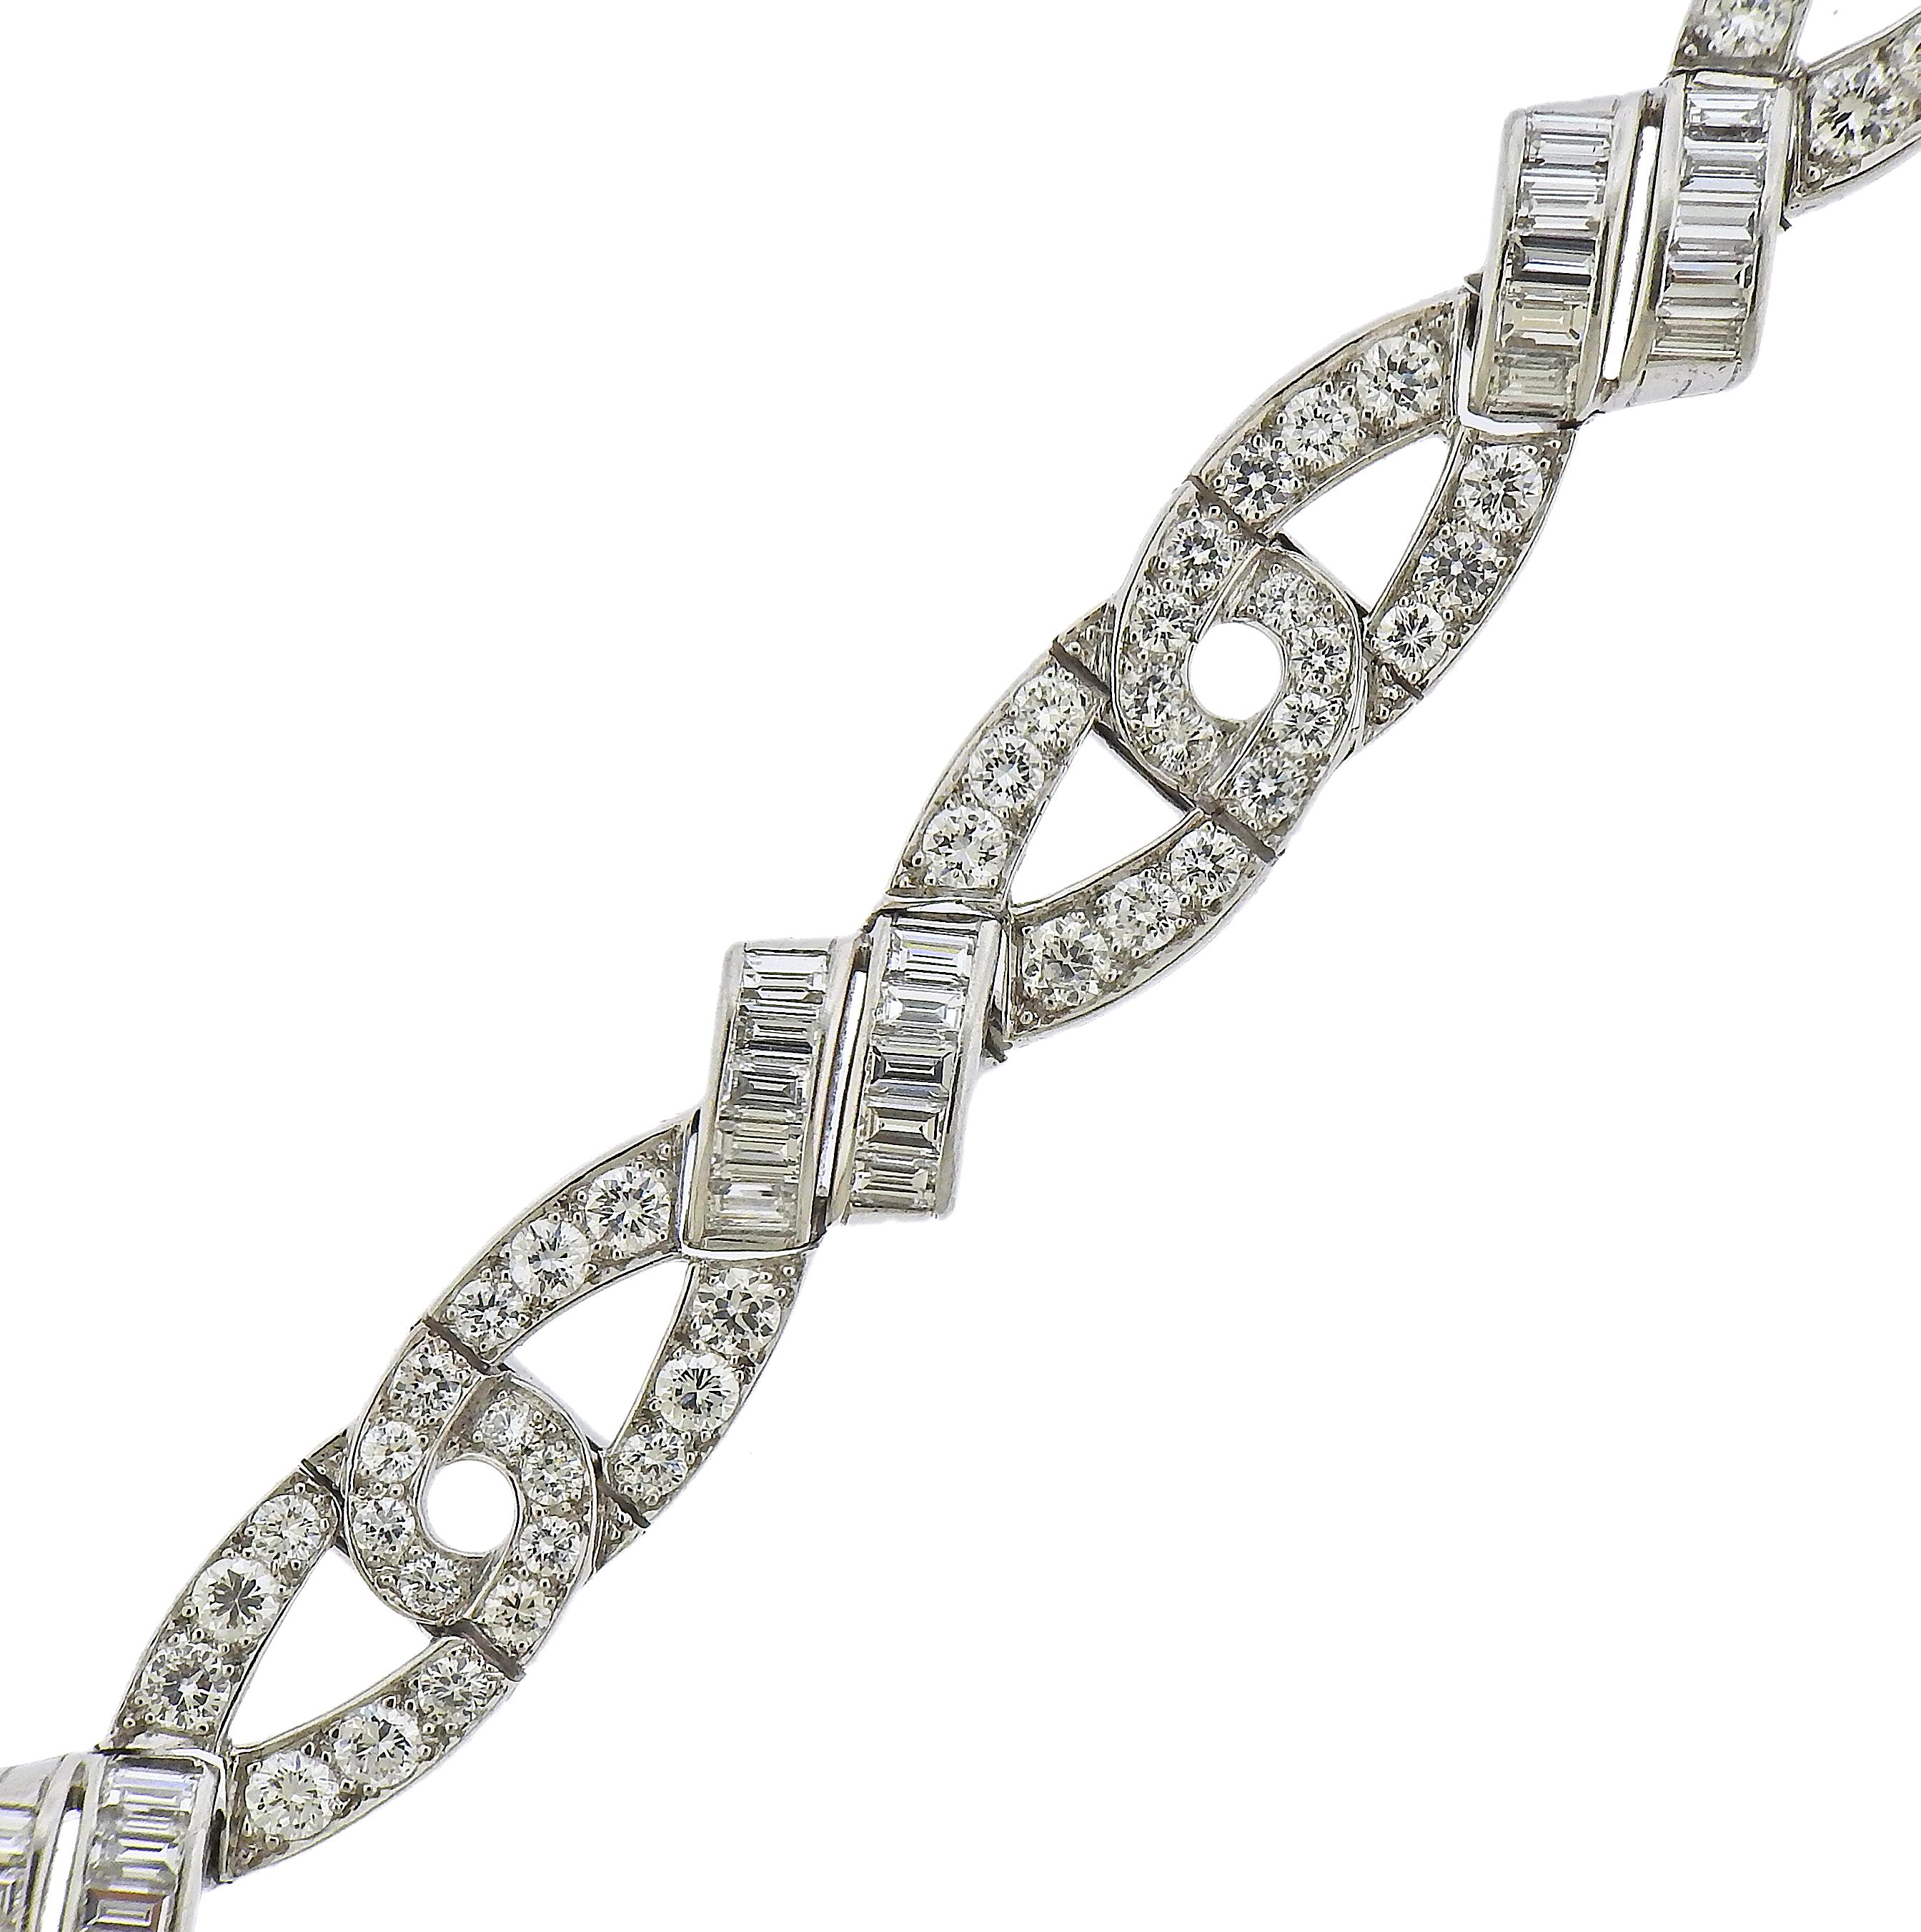 Gorgeous platinum bracelet by Oscar Heyman Bros., set with baguette and round diamonds - total approx. 7 to 7.50cts. Bracelet is 7.25